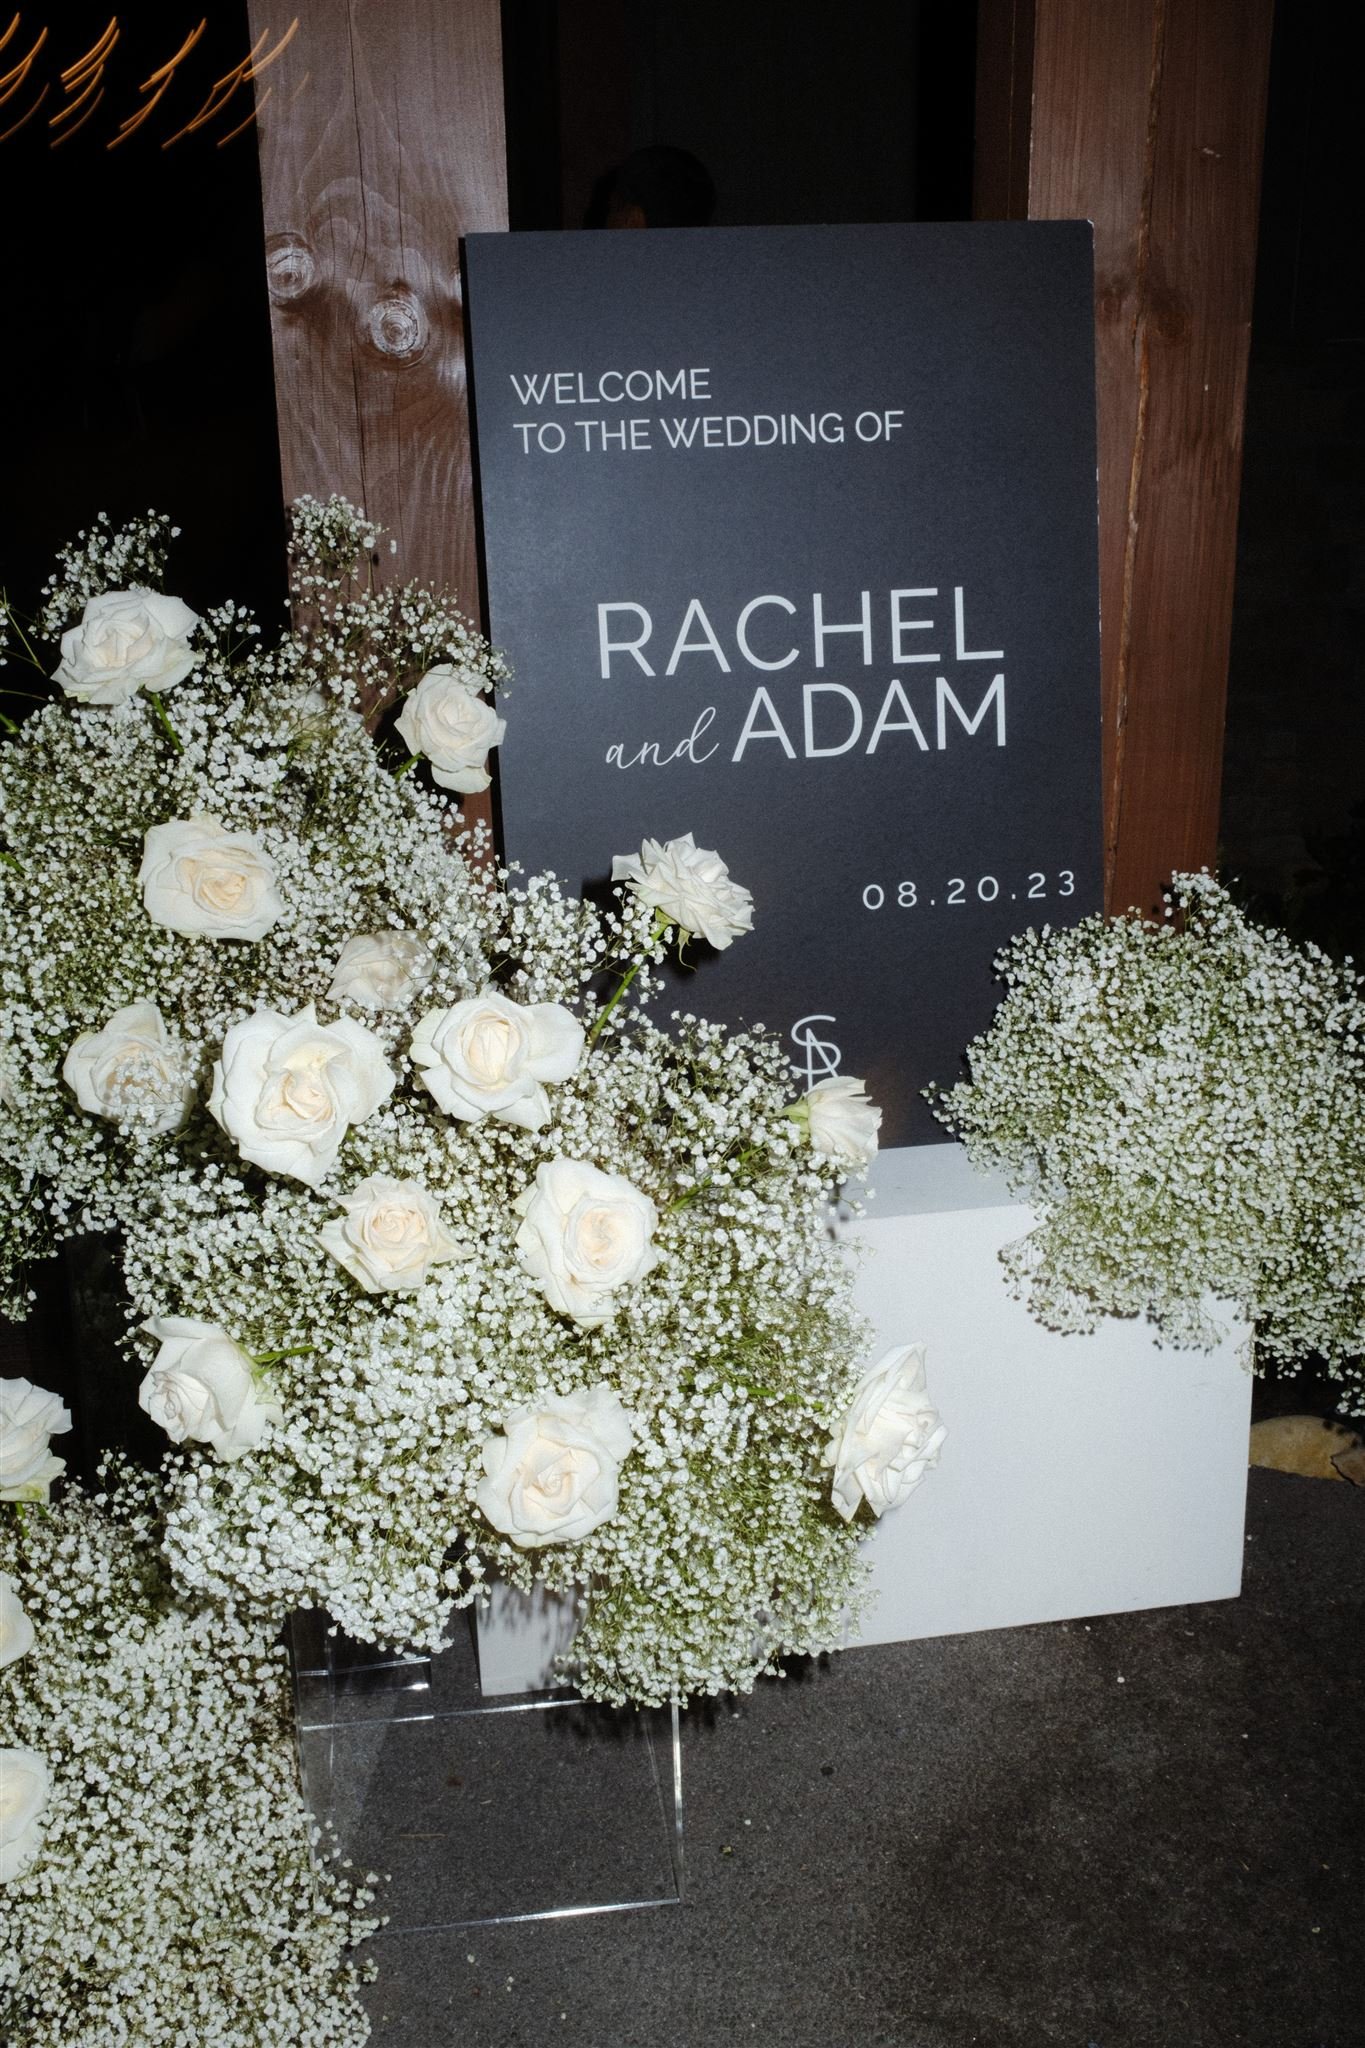 Wedding-Welcome-Sign-Black-and-White.jpg